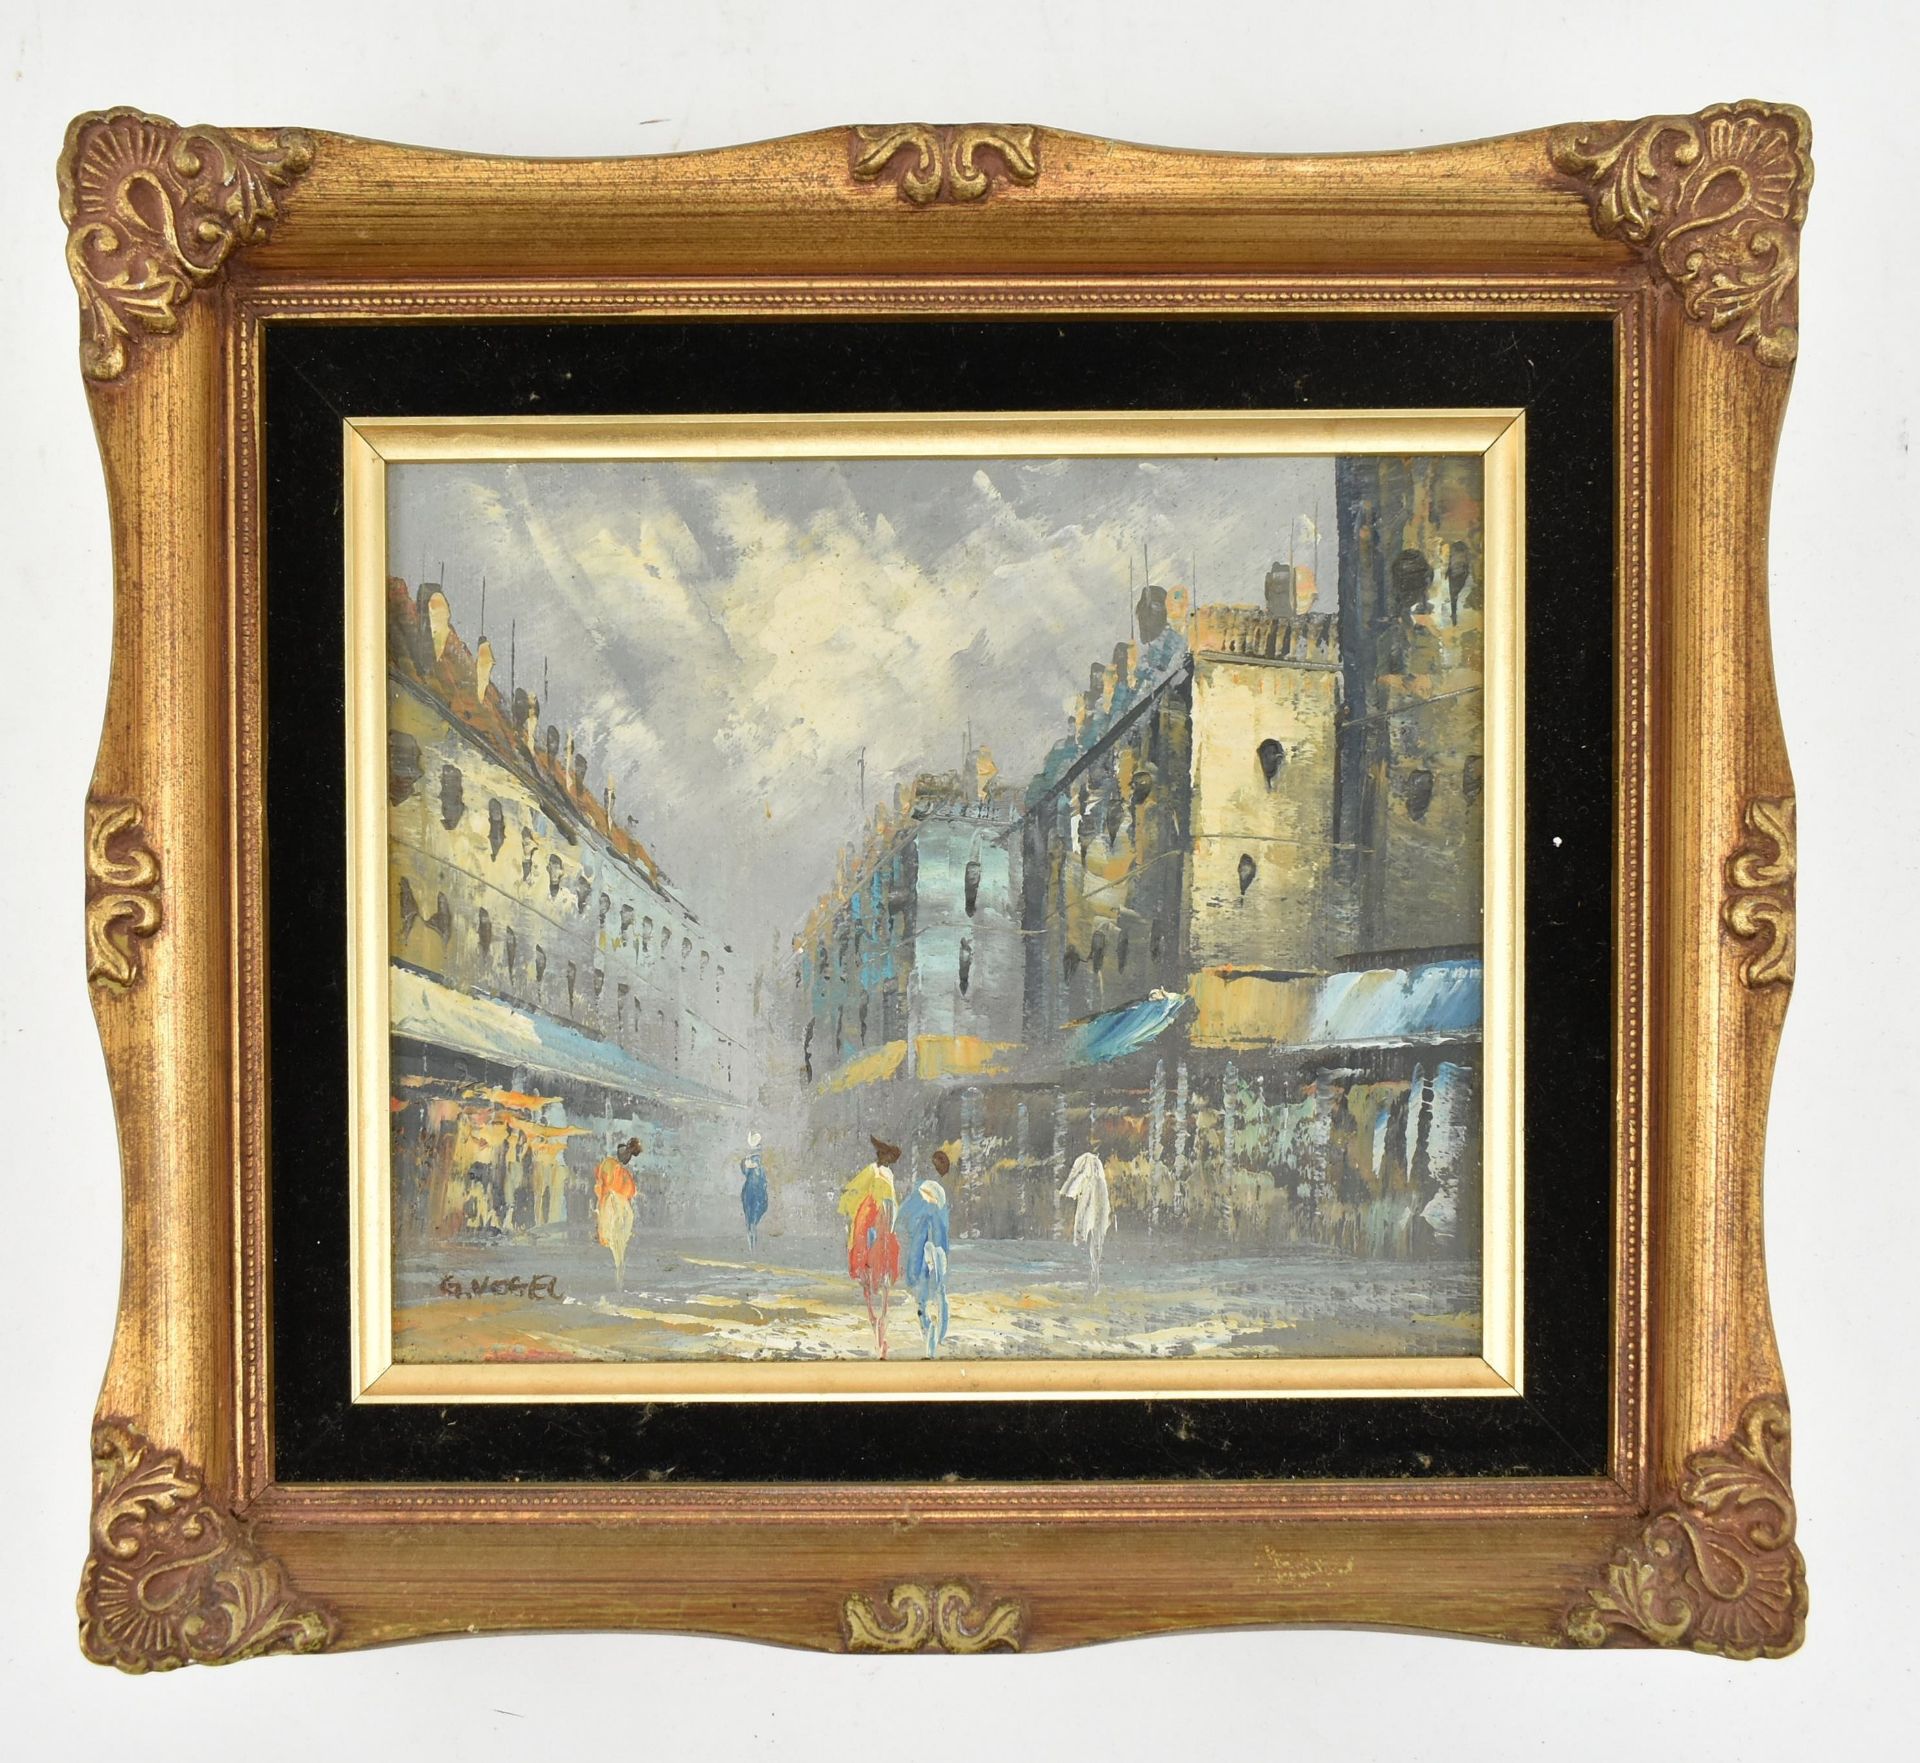 G. VOGEL - CONTEMPORARY OIL ON CANVAS PAINTING OF PARIS SCENE - Image 2 of 4